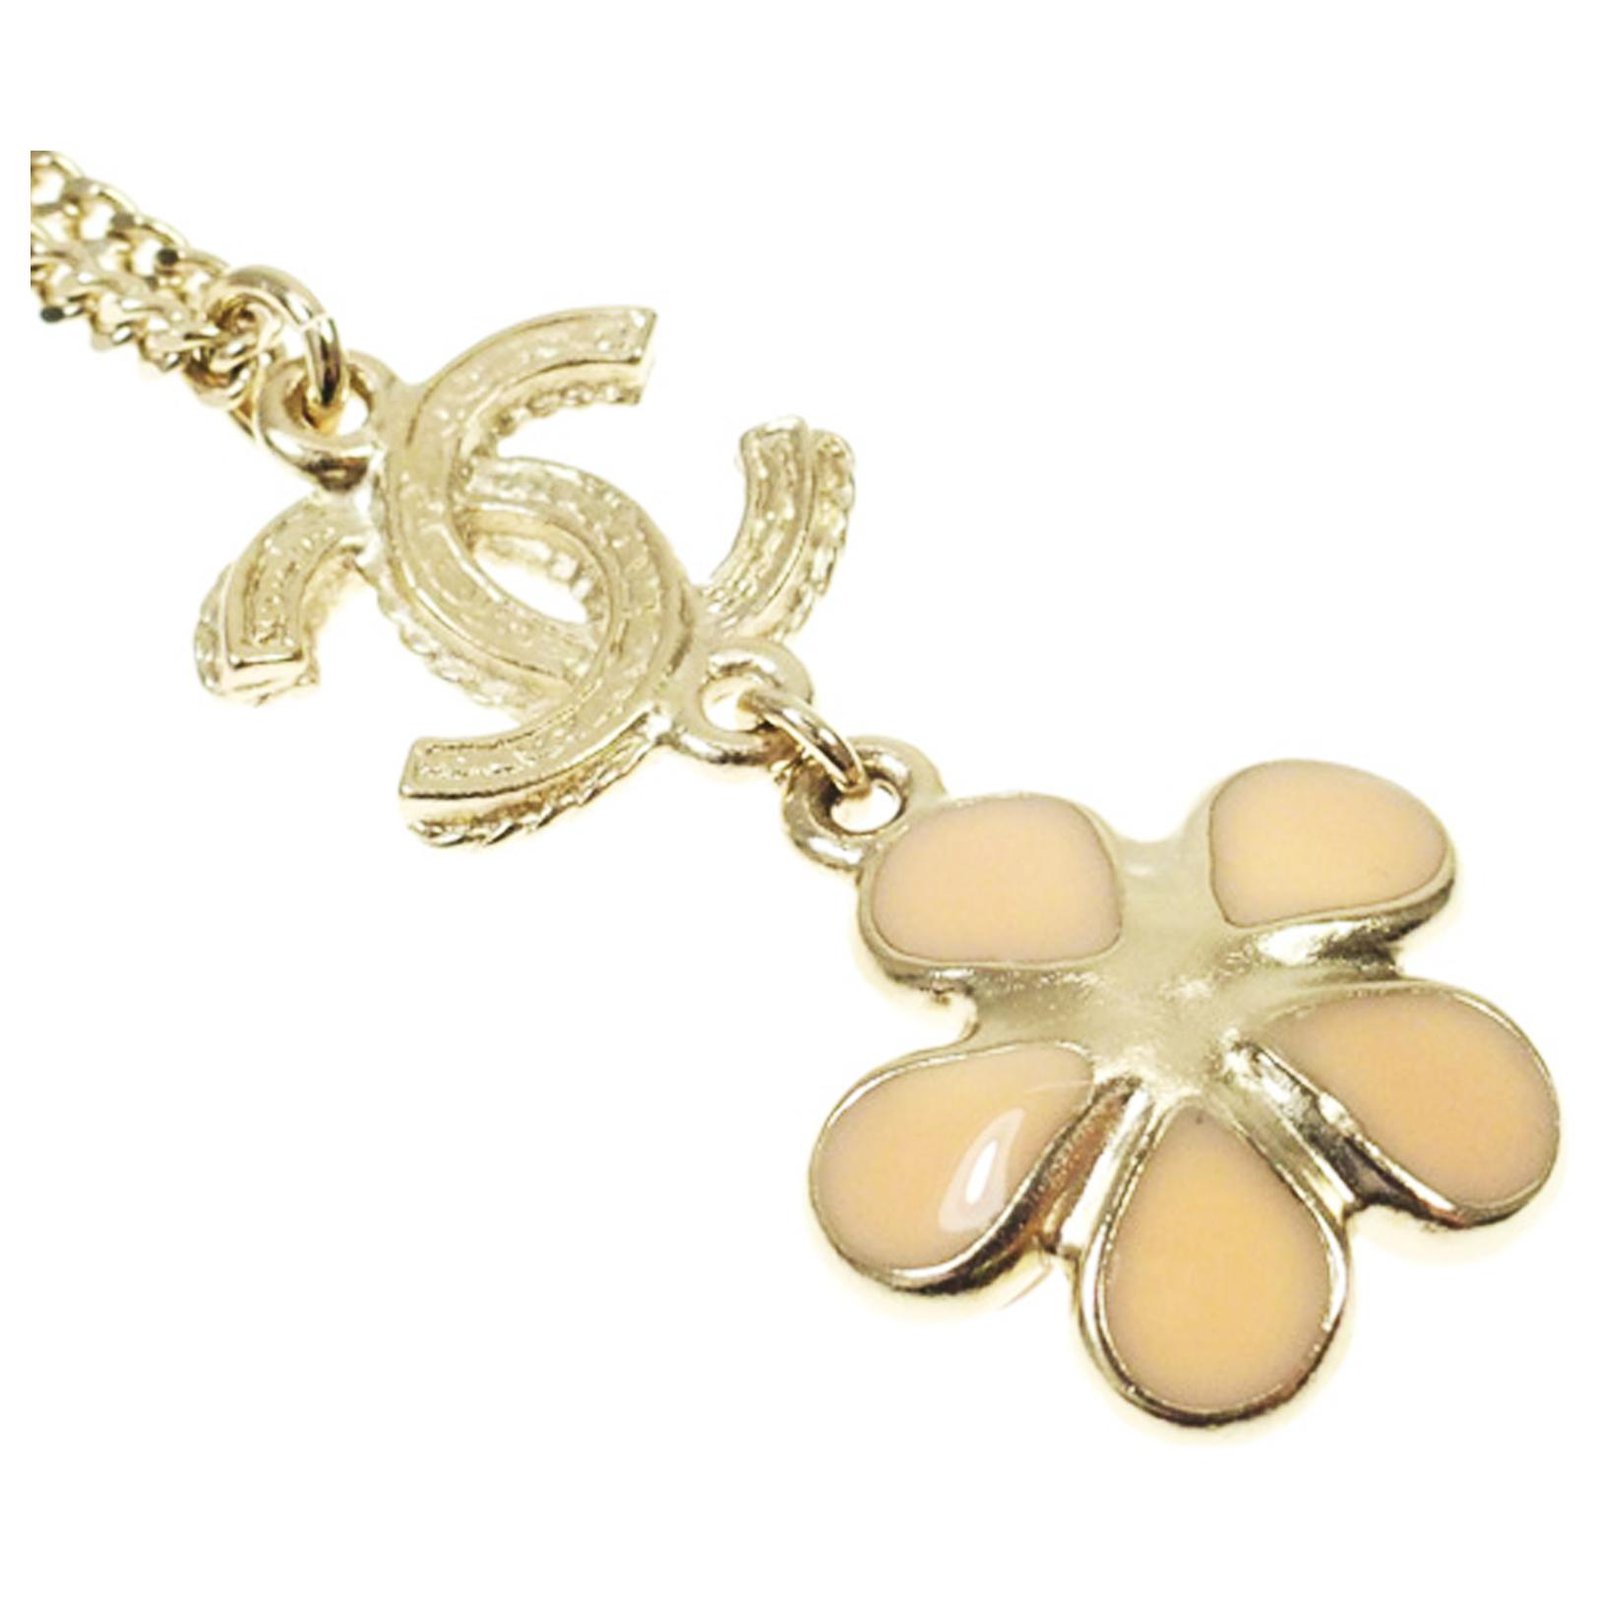 Chanel necklace Golden Gold-plated ref.214838